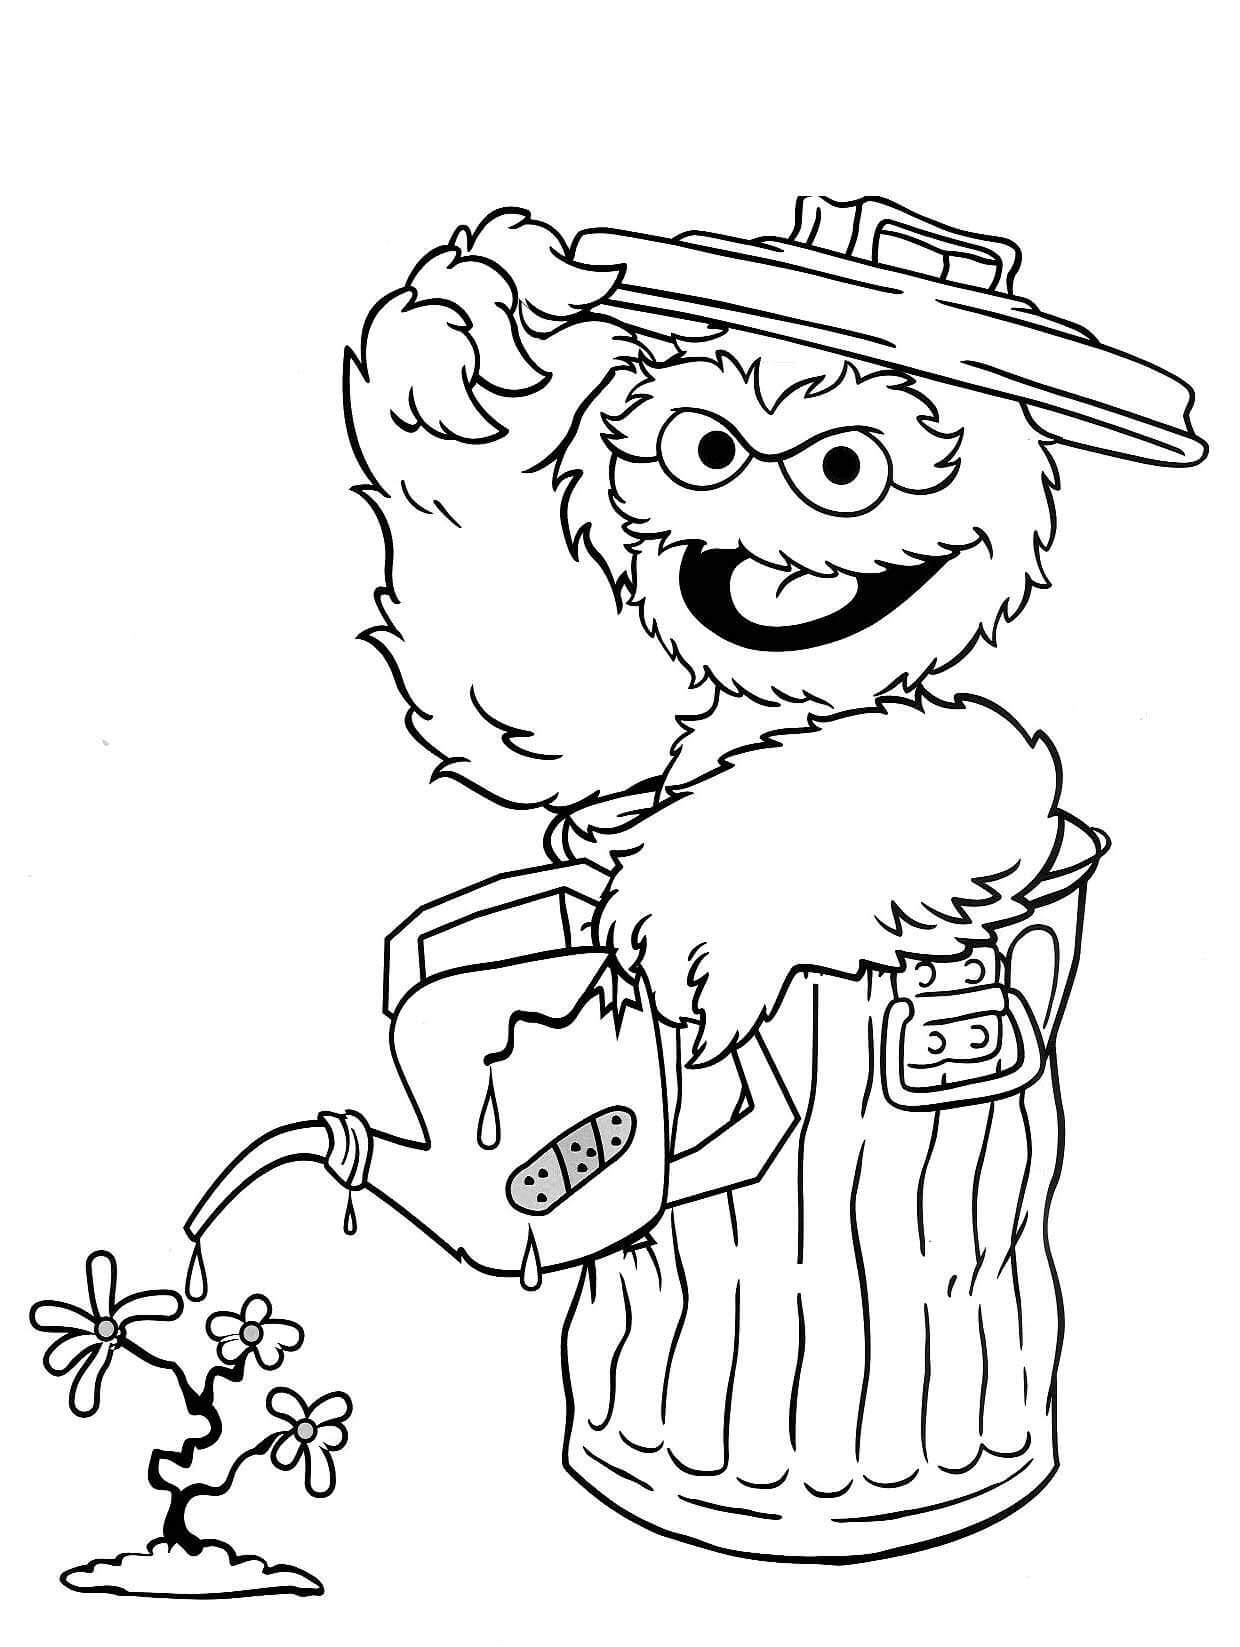 Oscar Sesame Street Coloring Pages